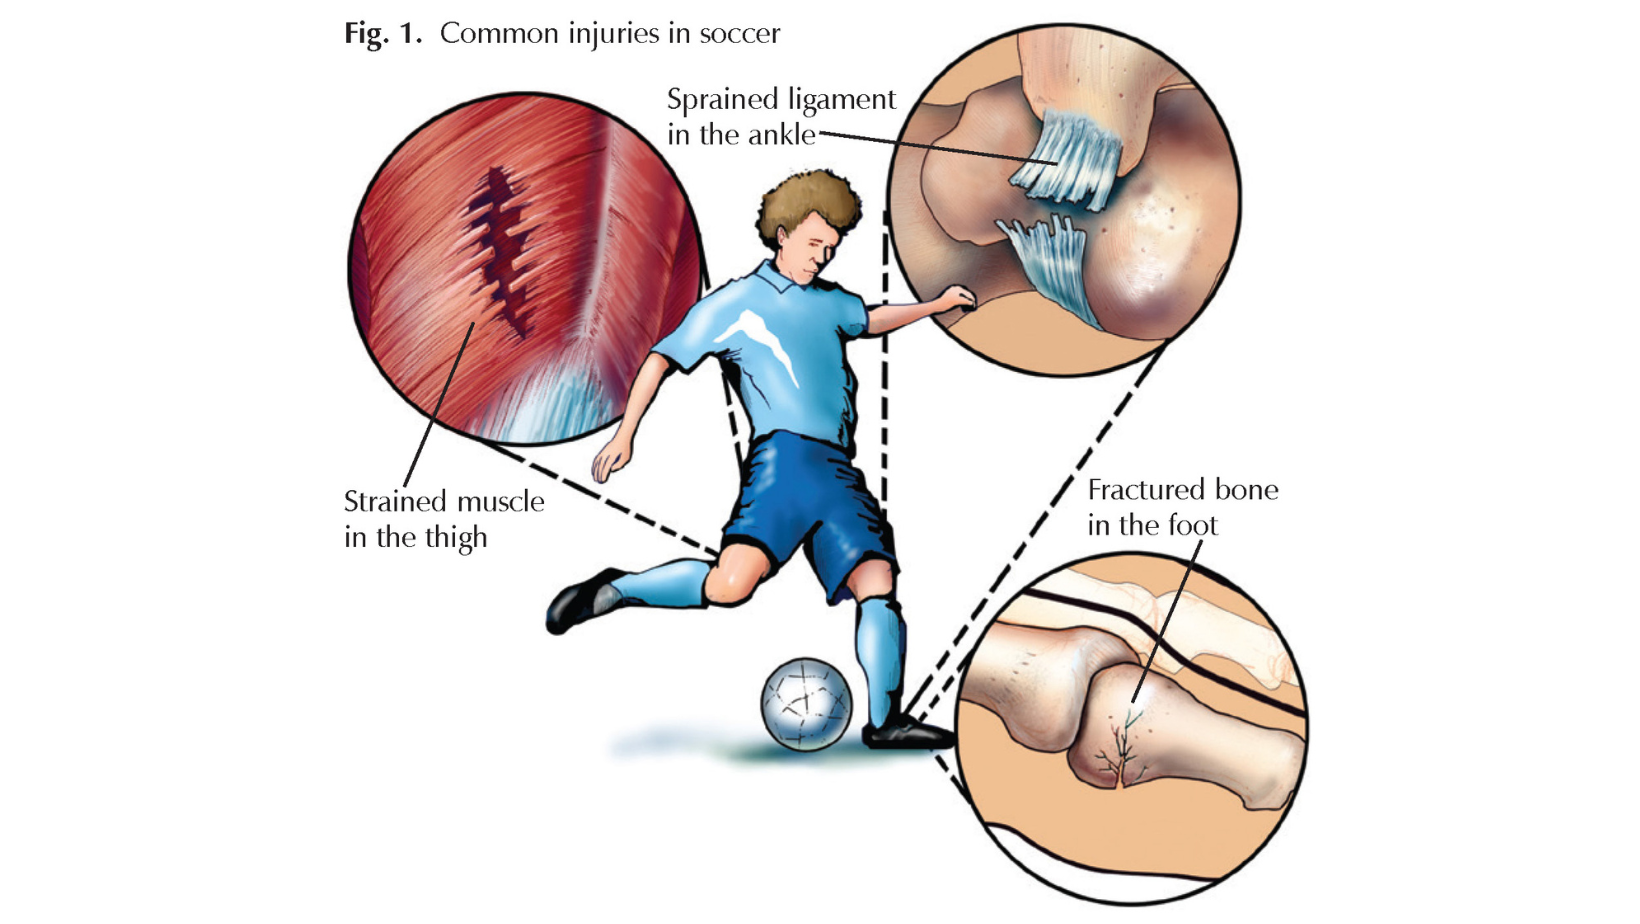 Soccer Players: Sprains, Strains, and Breaks